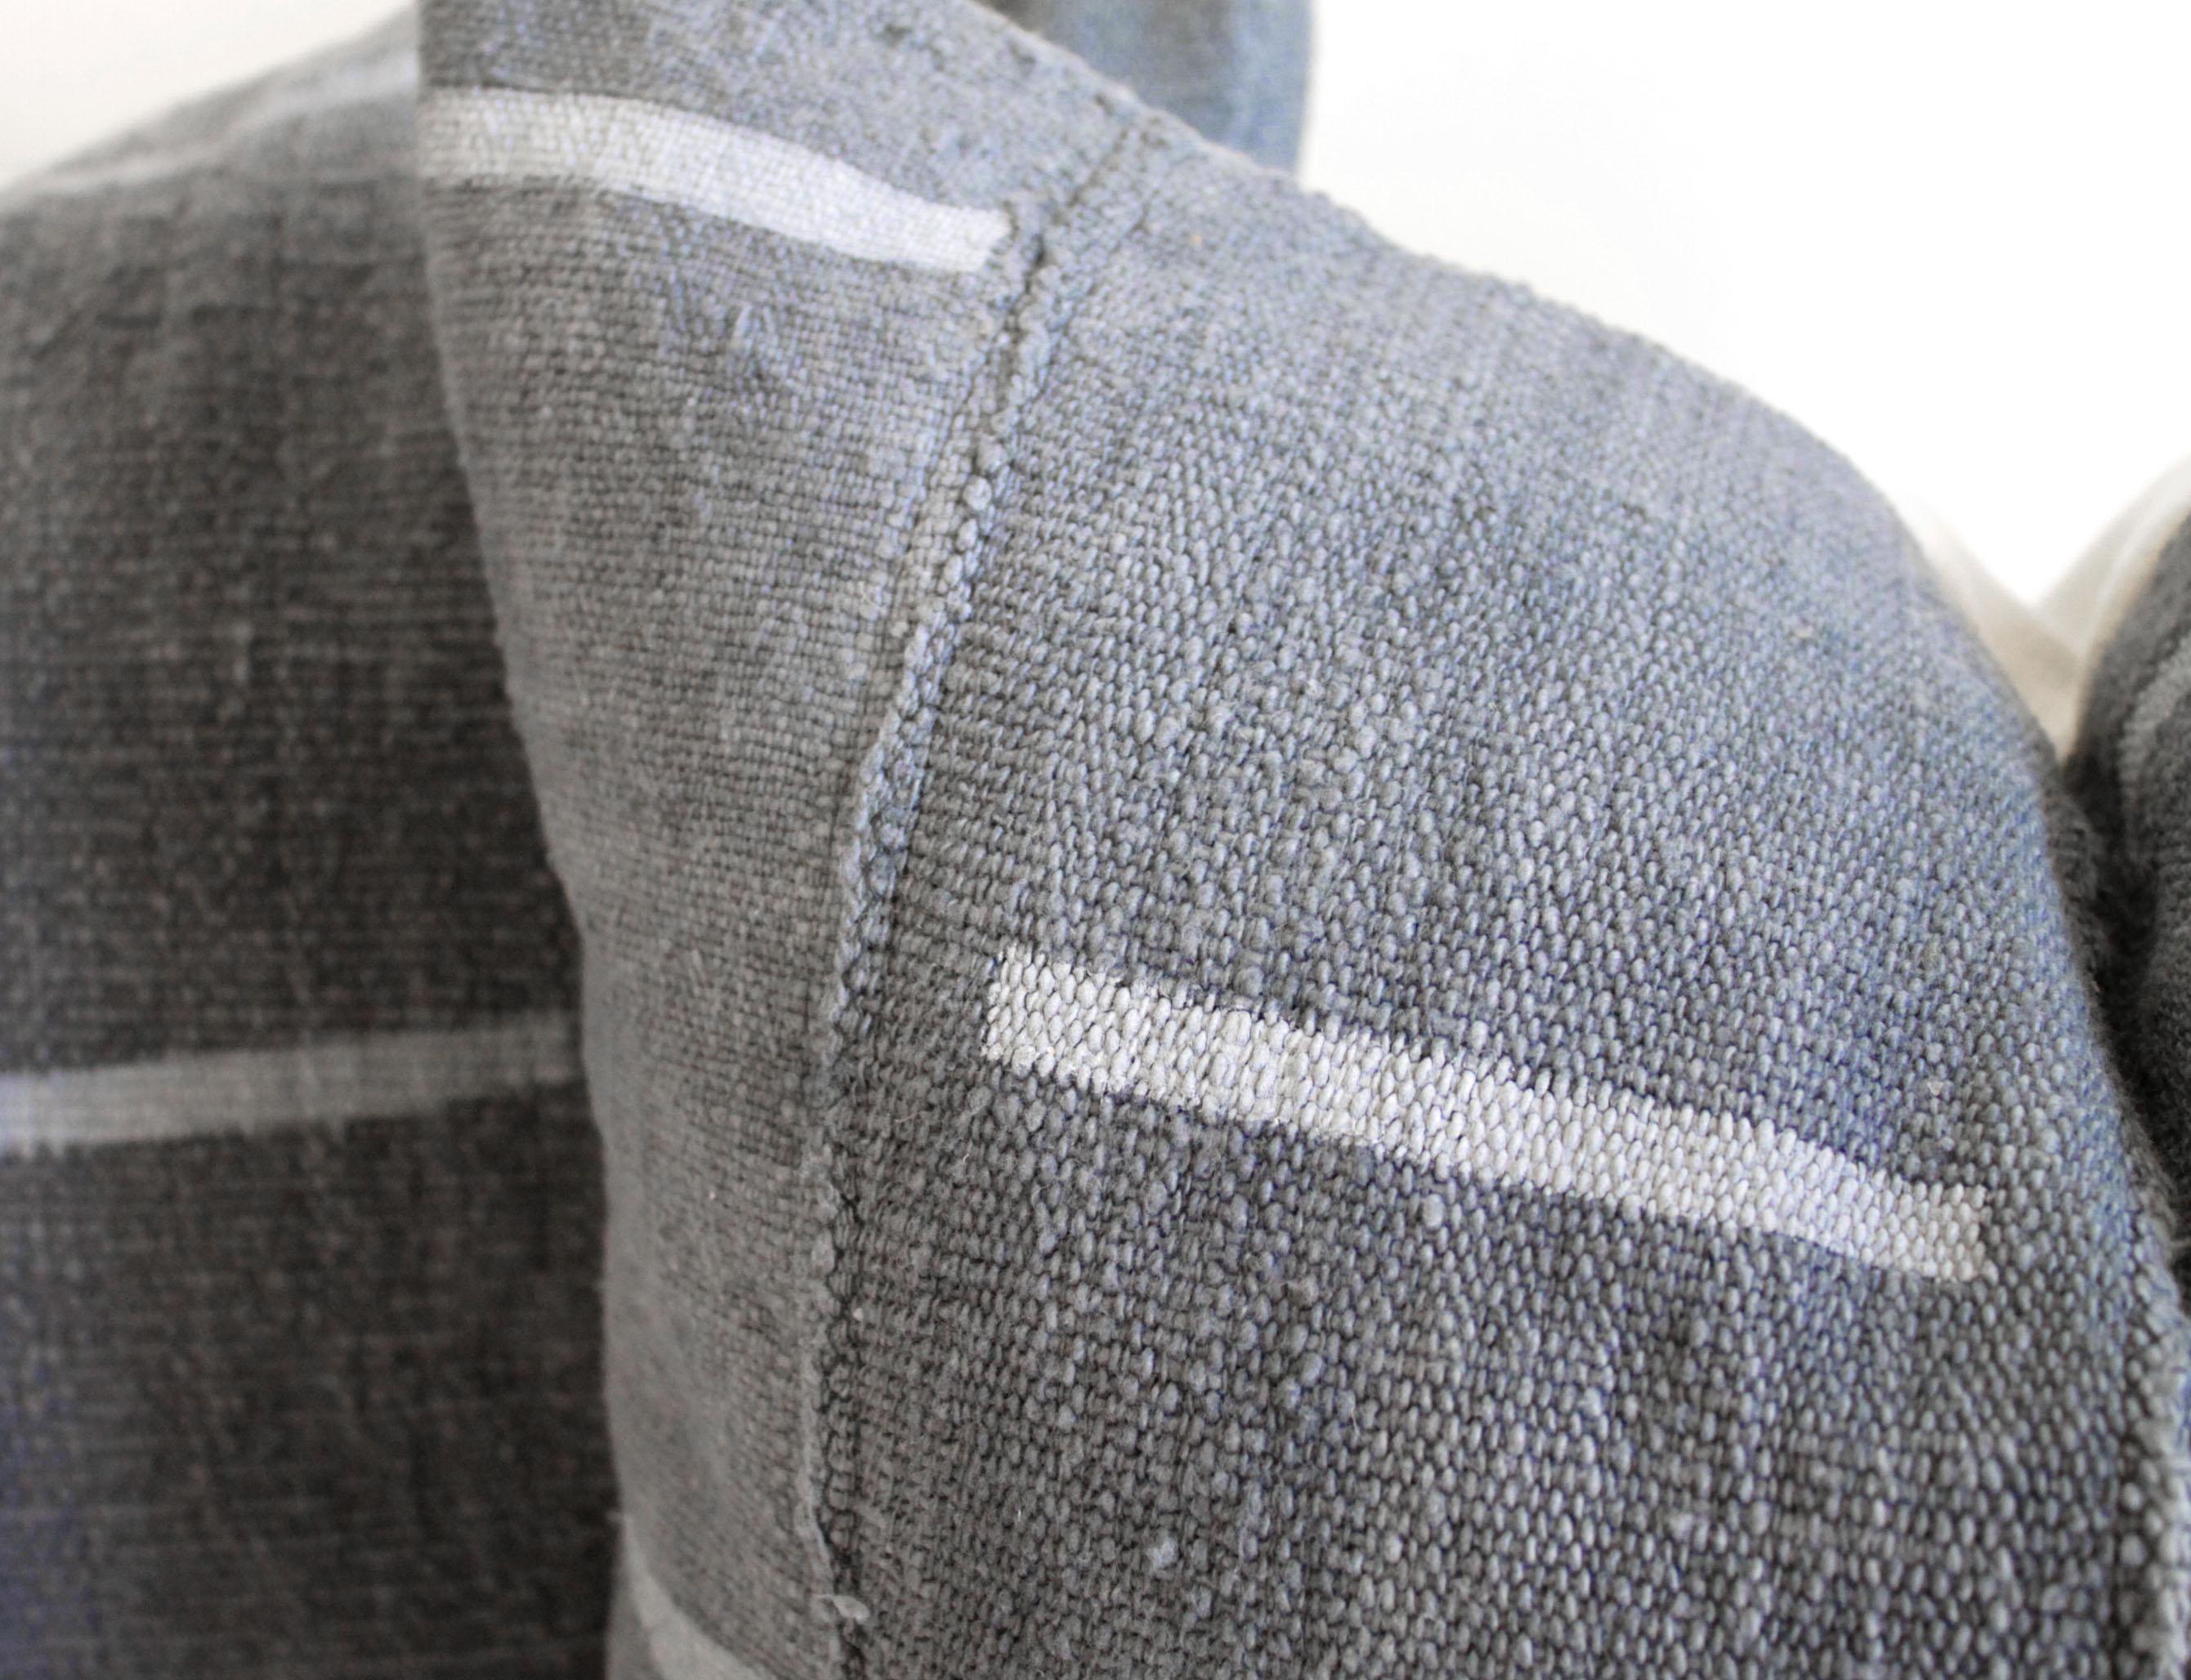 This cotton face features a deep moody gray blue with light gray stripes. The backing is 100% Irish linen in natural linen. Our pillows are constructed with vintage one of a kind textiles from around the globe. Carefully constructed with the finest